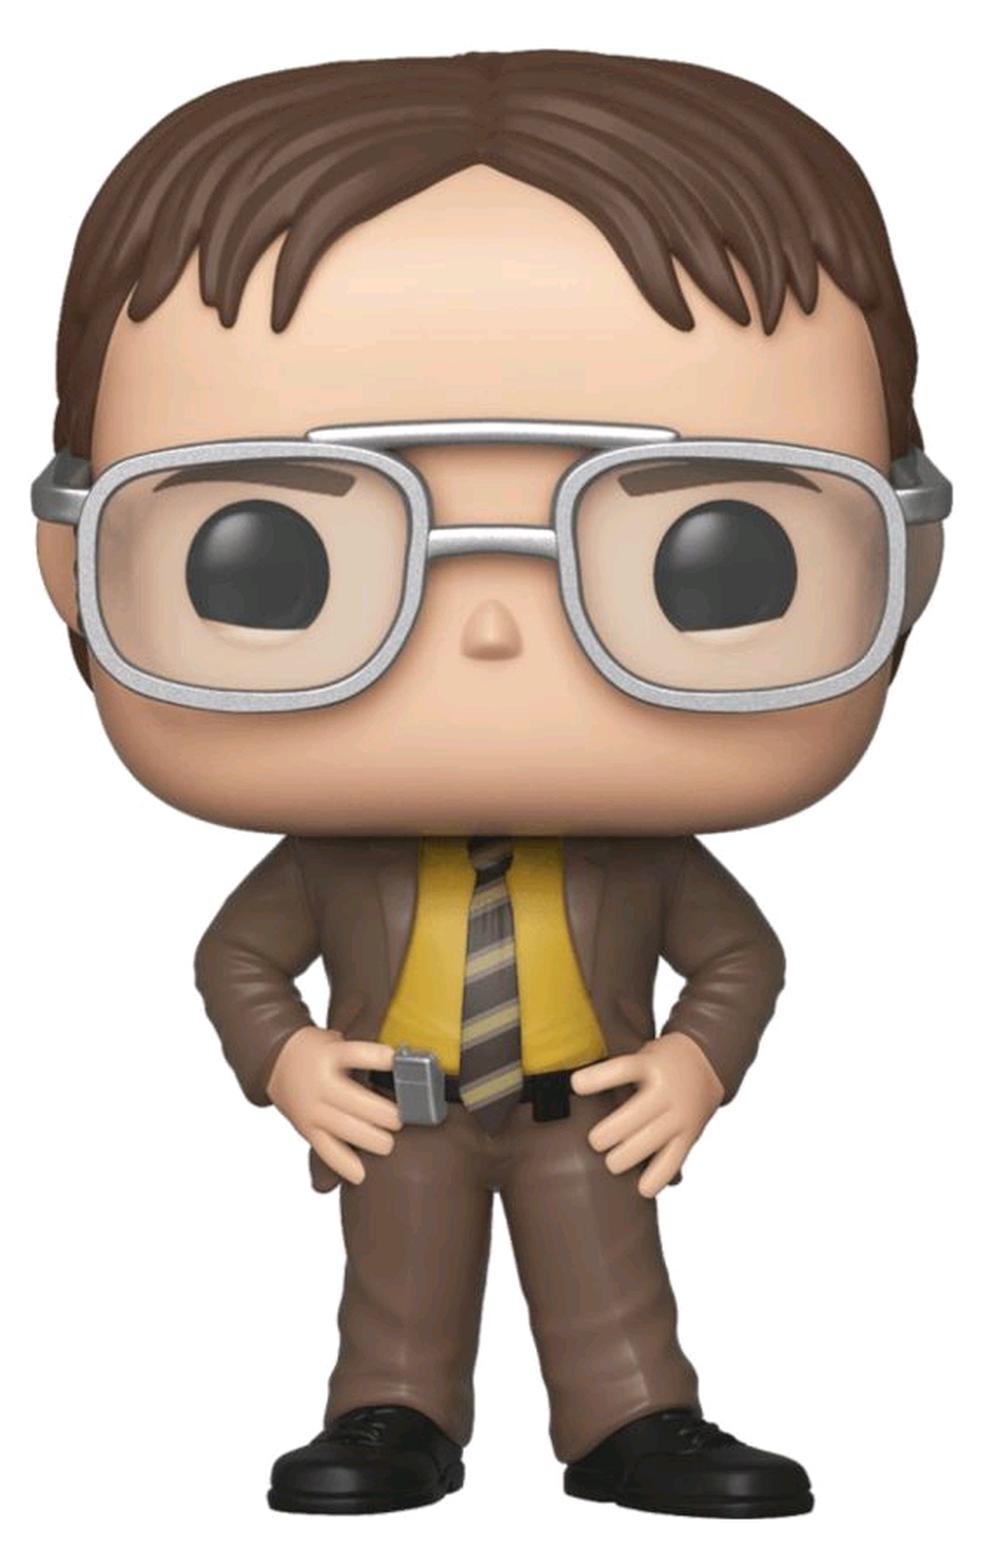 Funko The Office Dwight Schrute Pop! Vinyl Figure Buy online at The